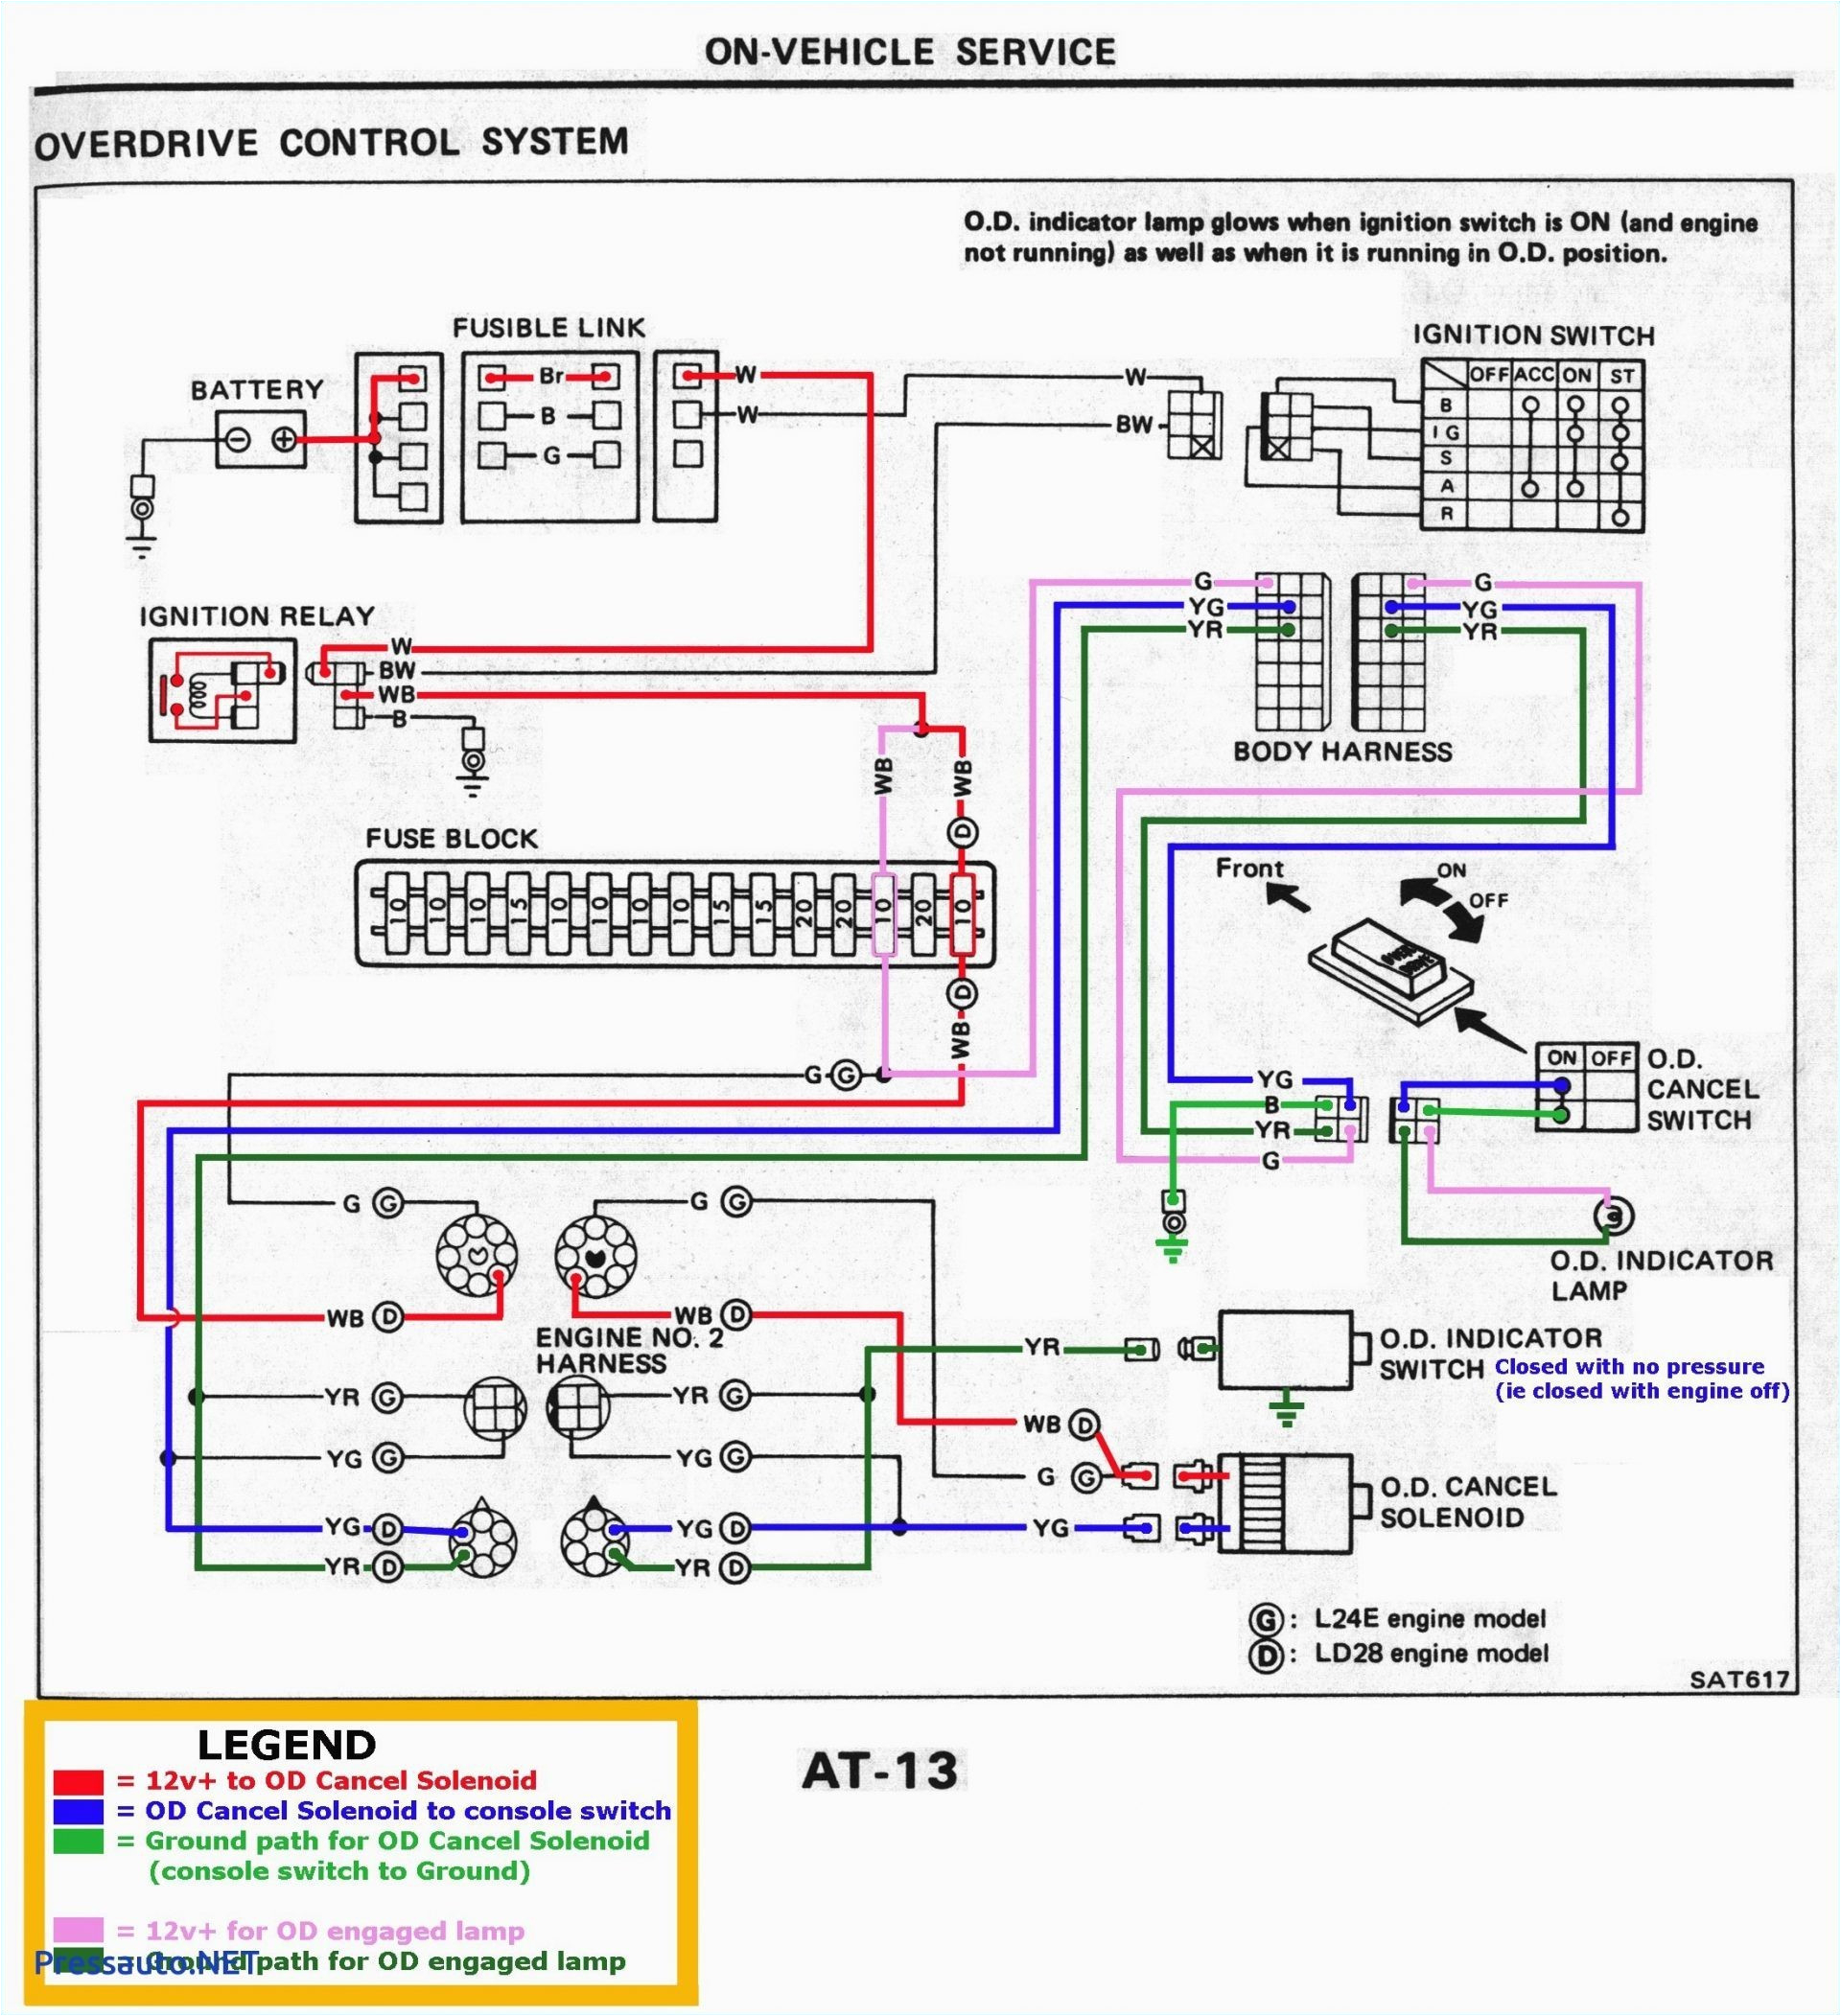 2014 Ford F150 Wiring Diagram from autocardesign.org